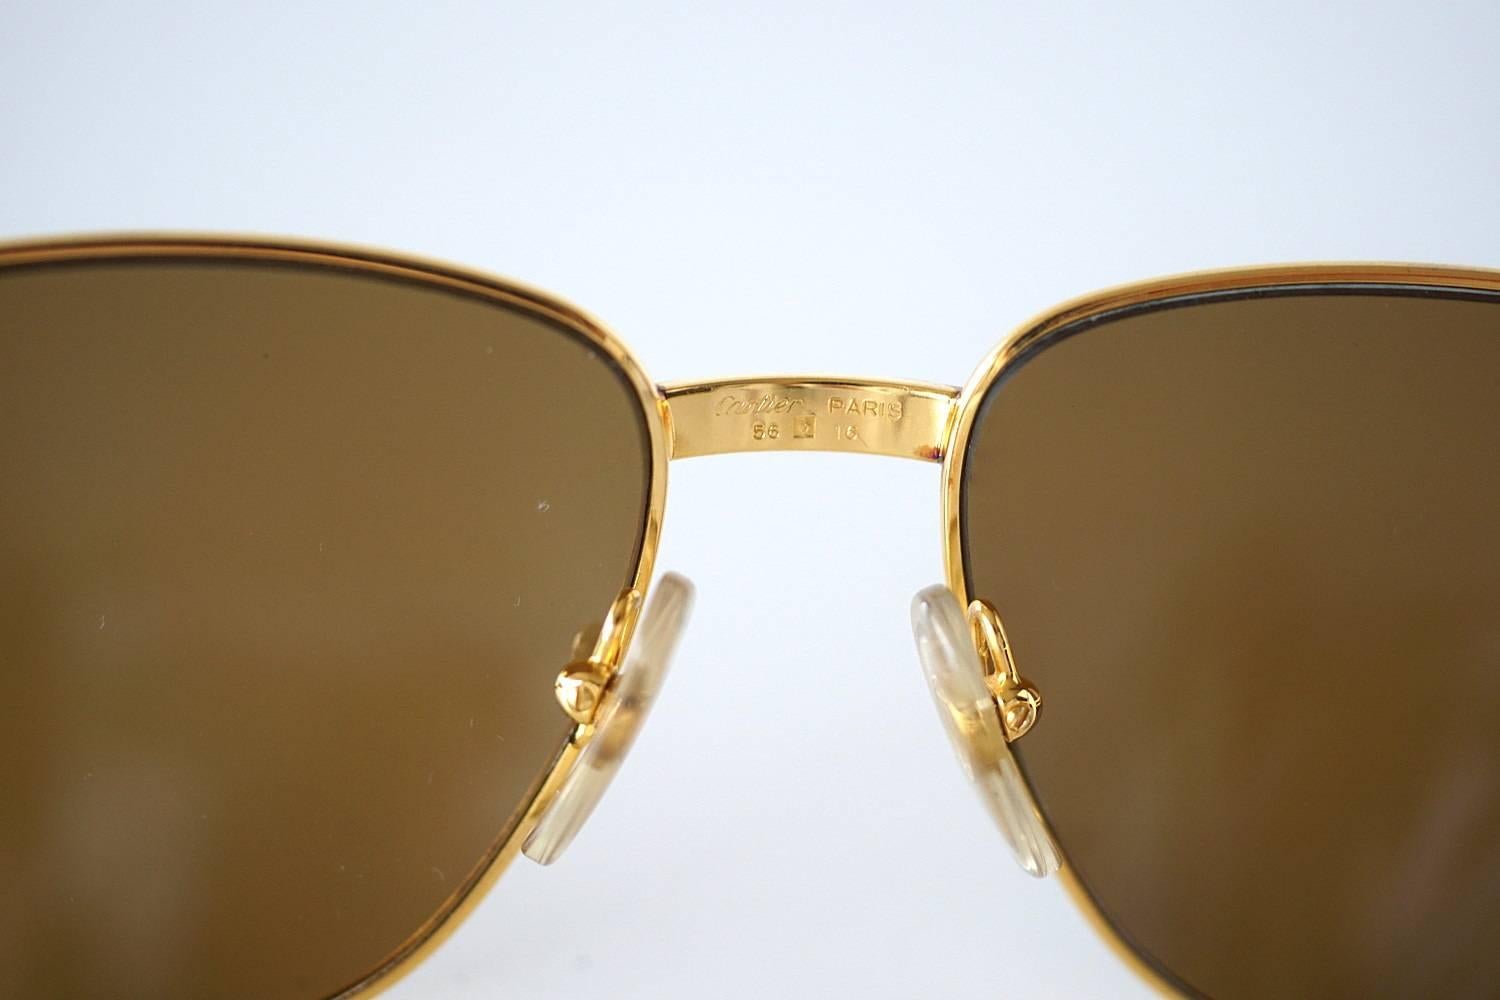 Guaranteed authentic Cartier Vintage sunglasses - no longer available. 
Beautifully detailed arms with Signature logo.
Lenses have a light bronze tint.
Bridge is classic Santos numbered underneath 702347 and is logo embossed on the inside. 